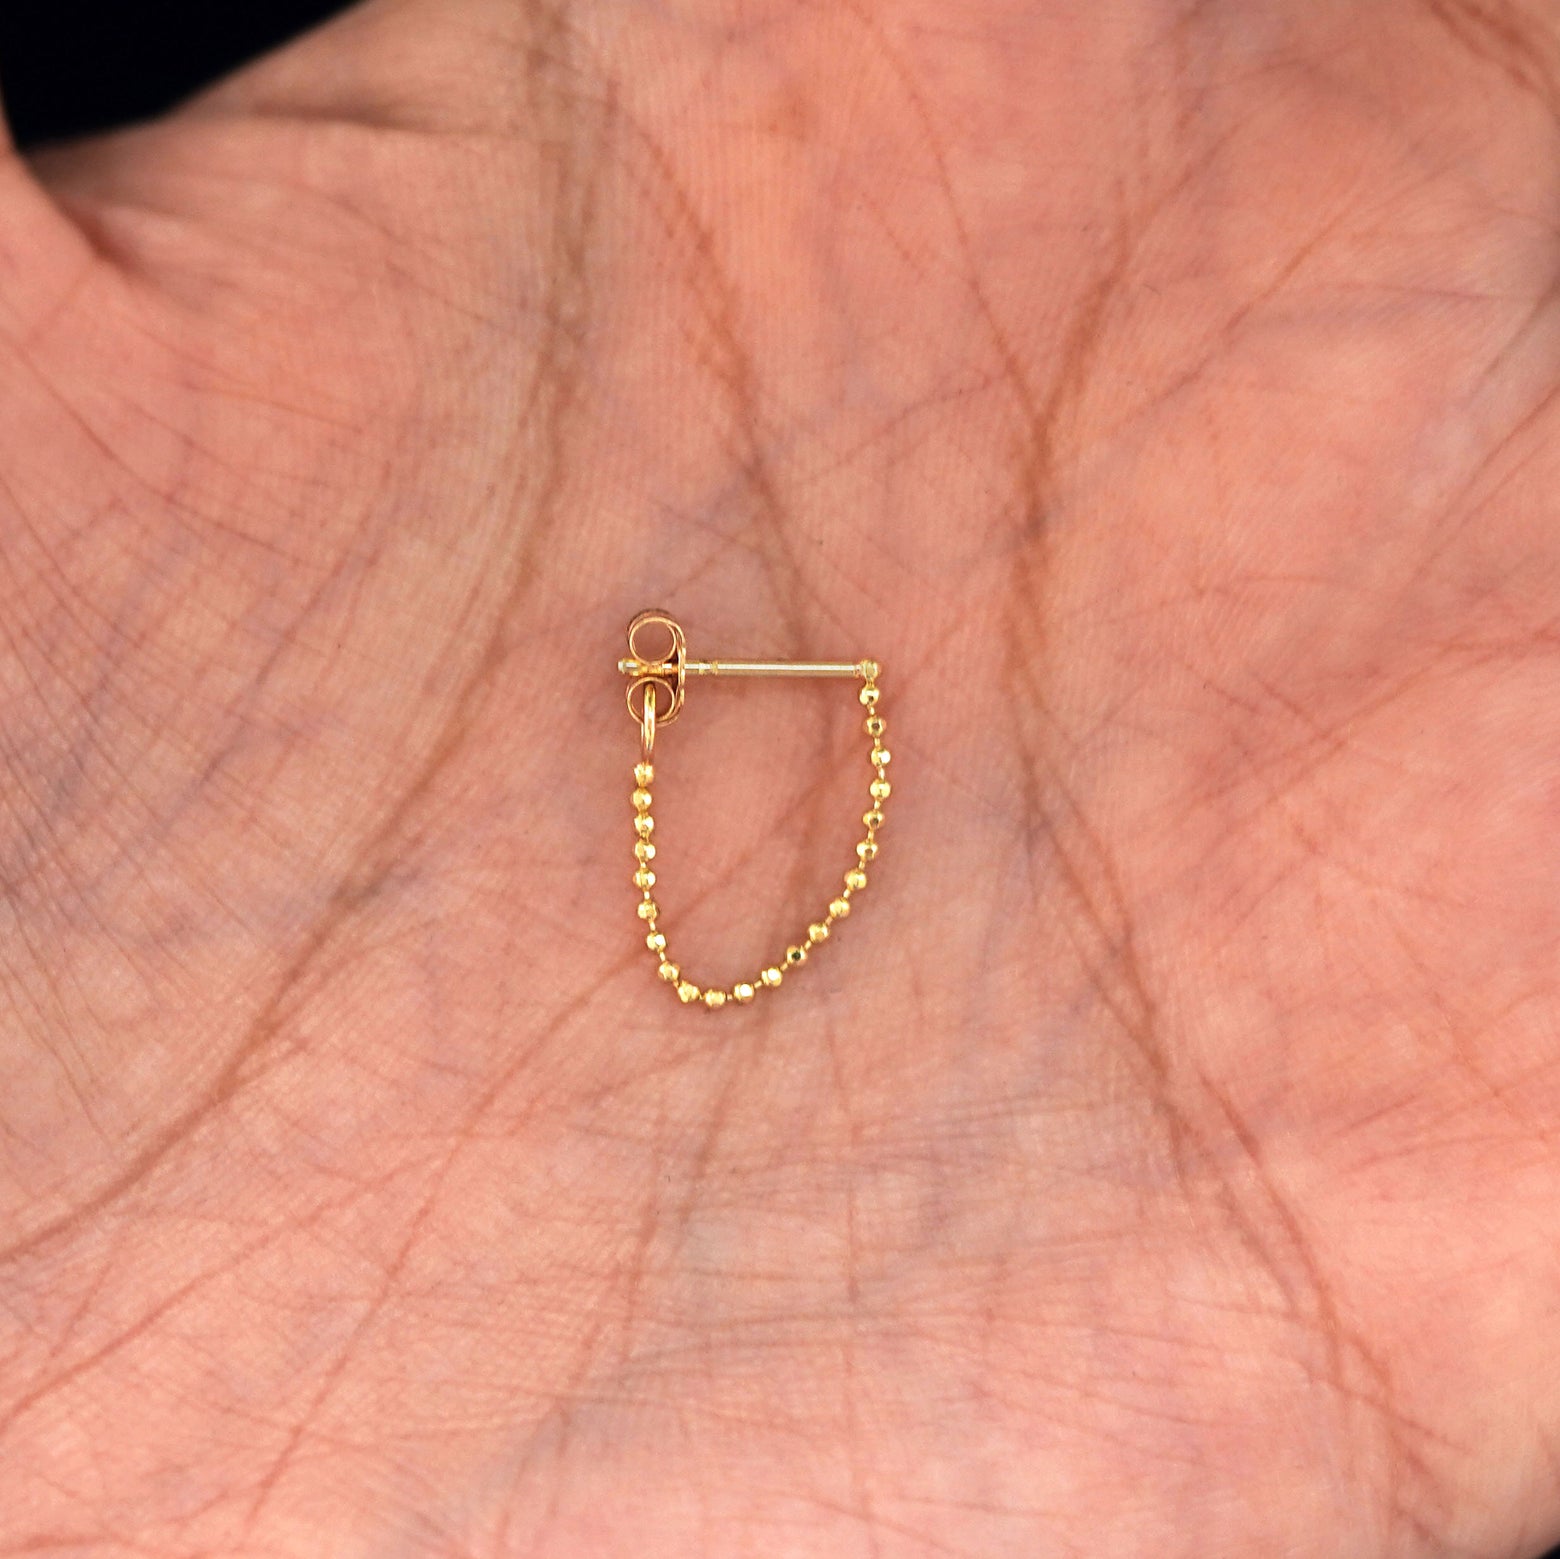 A solid yellow gold Chain Loop with the backing attached to post sitting in a model's hand